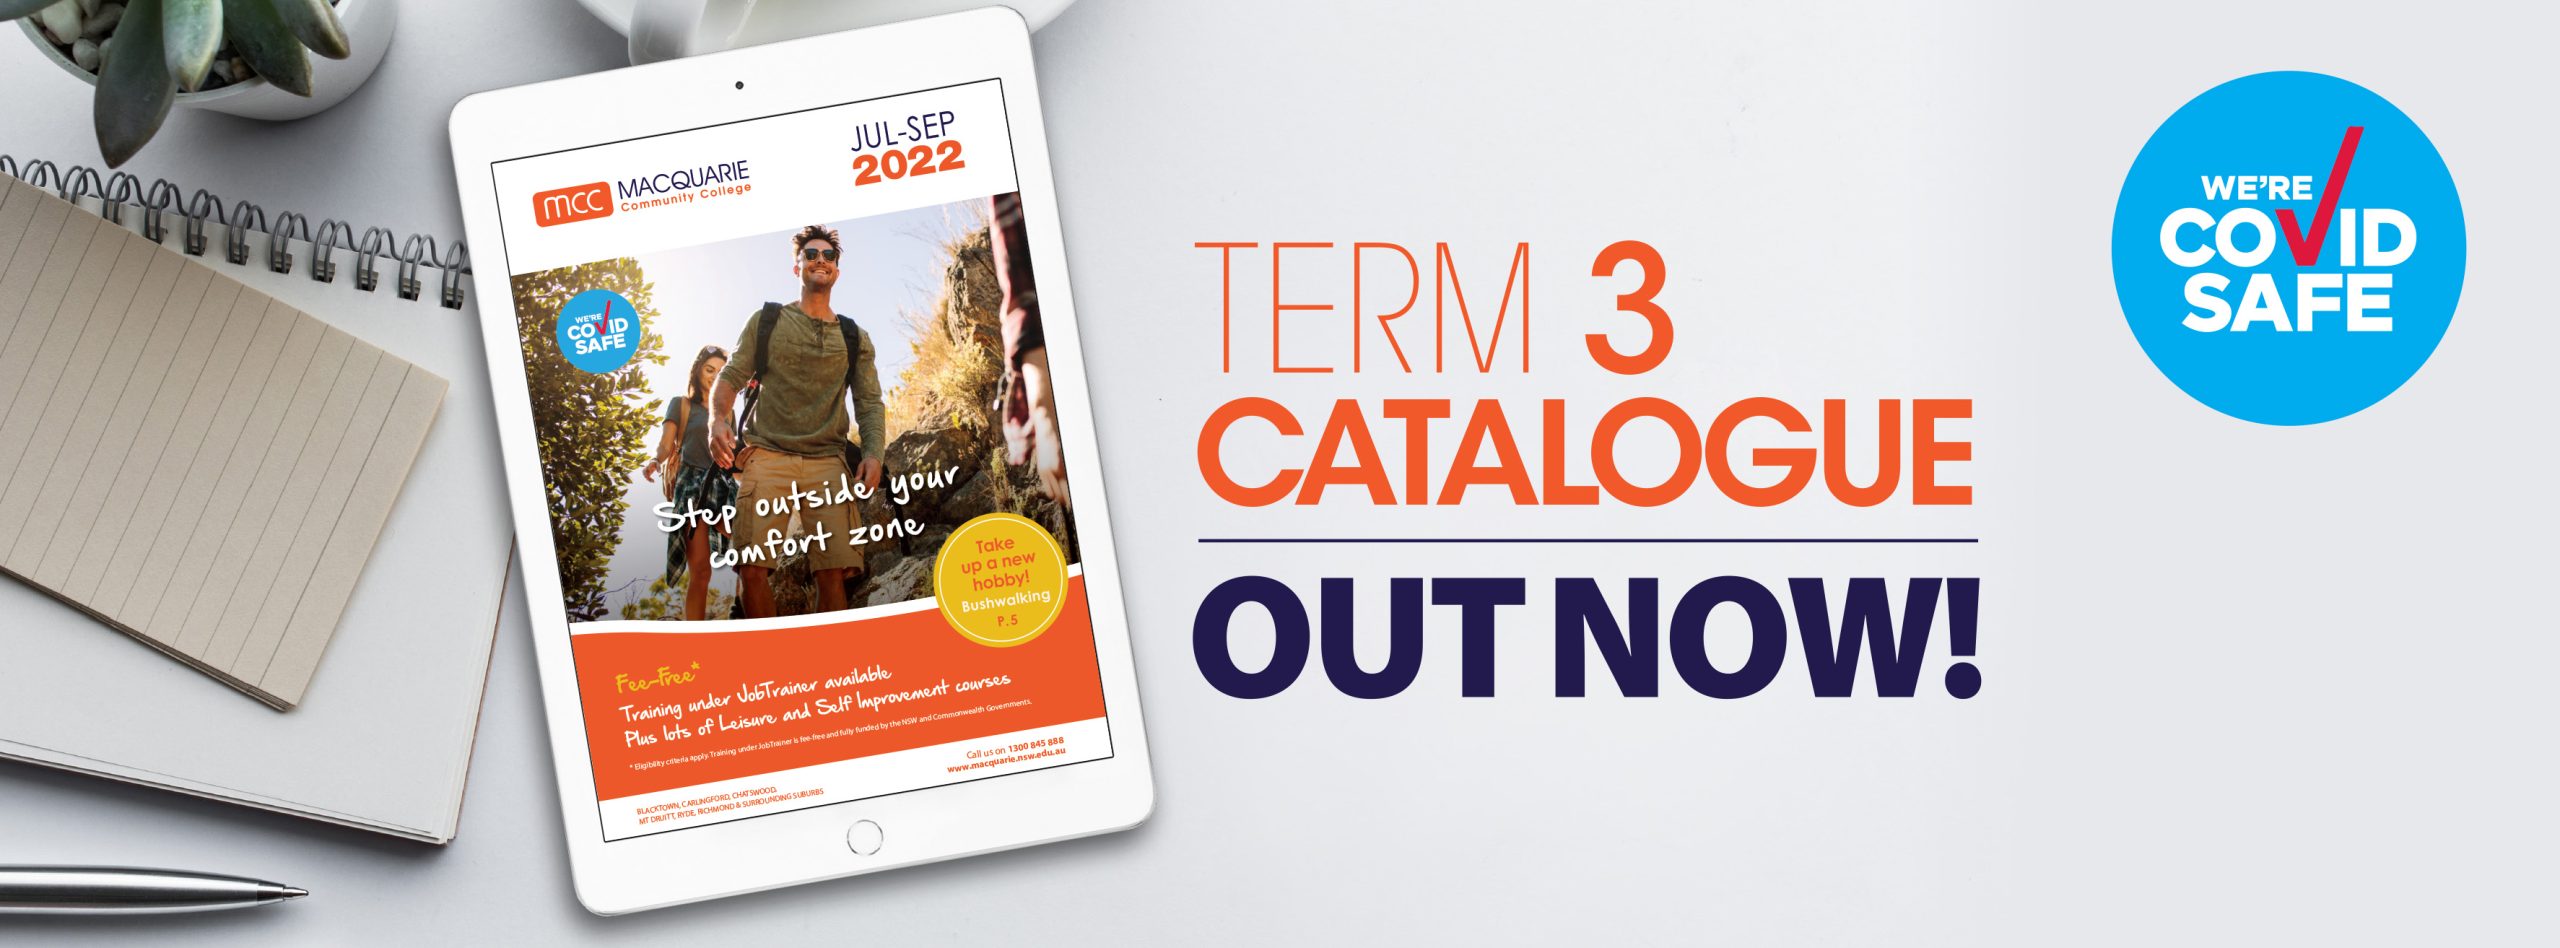 Term 3 Catalogue Out Now! Step Outside Your Comfort Zone